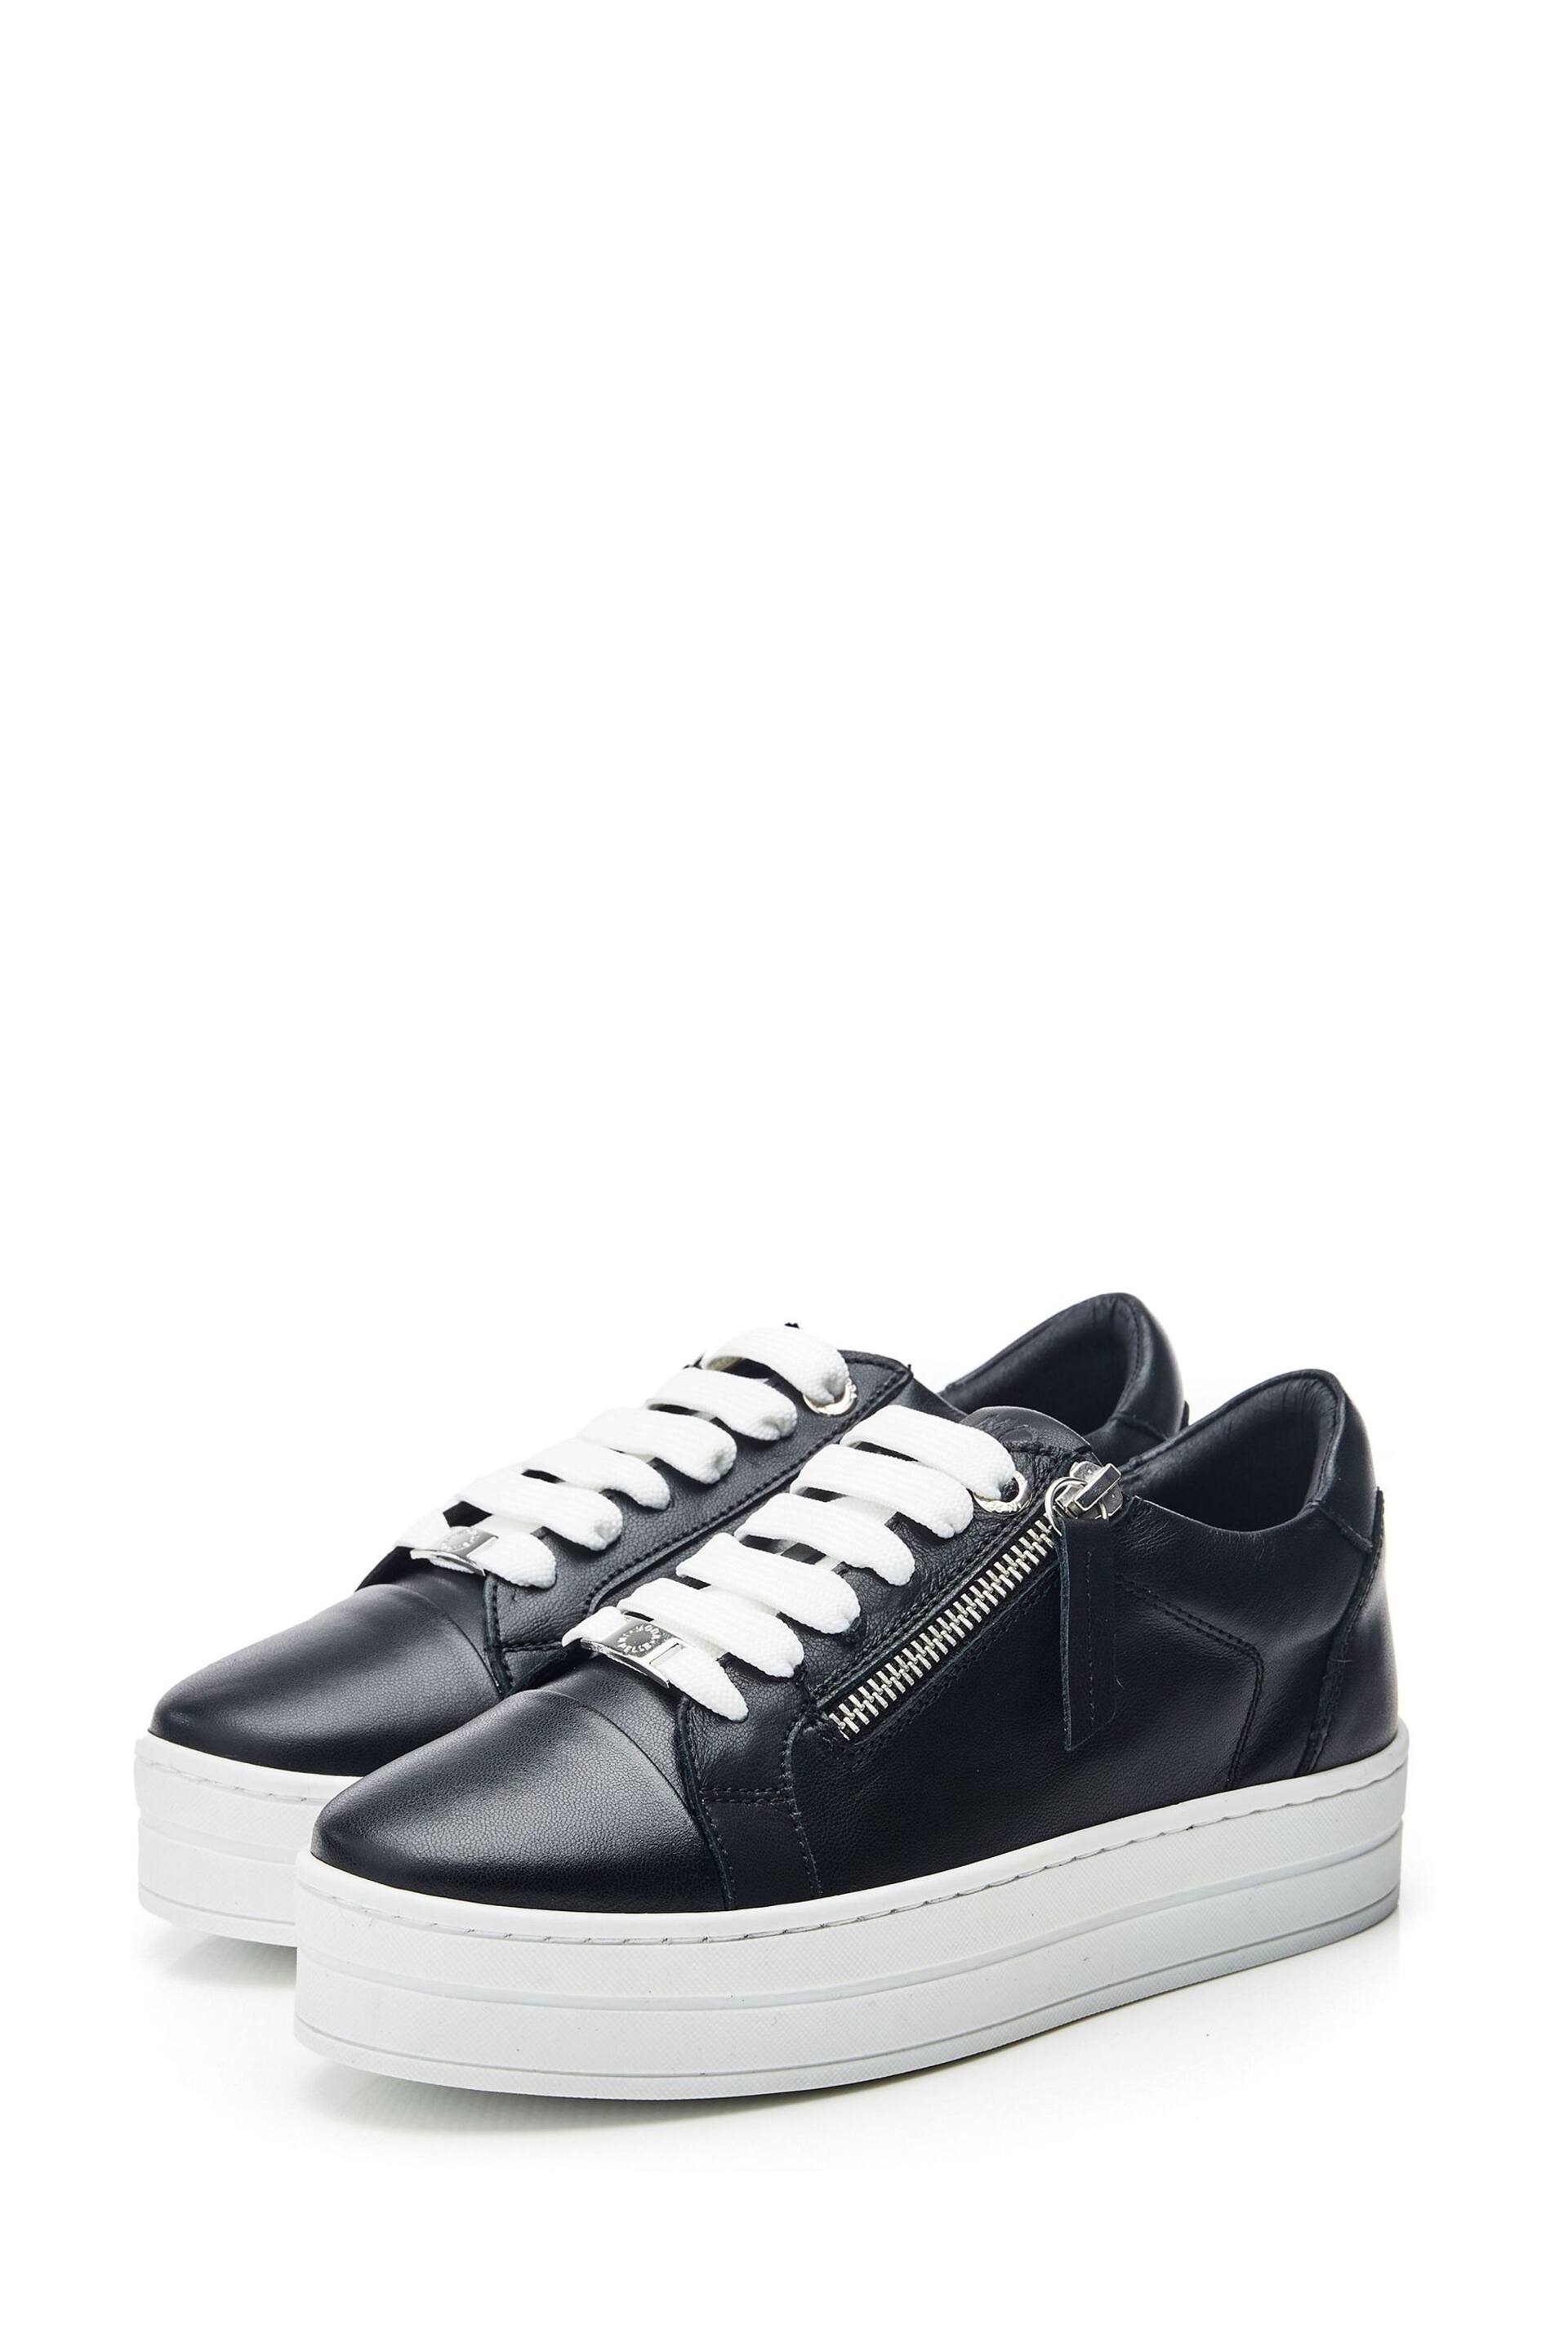 Moda In Pelle Abbiy Chunky Slab Sole Side Zip Lace Up Trainers - Image 2 of 4